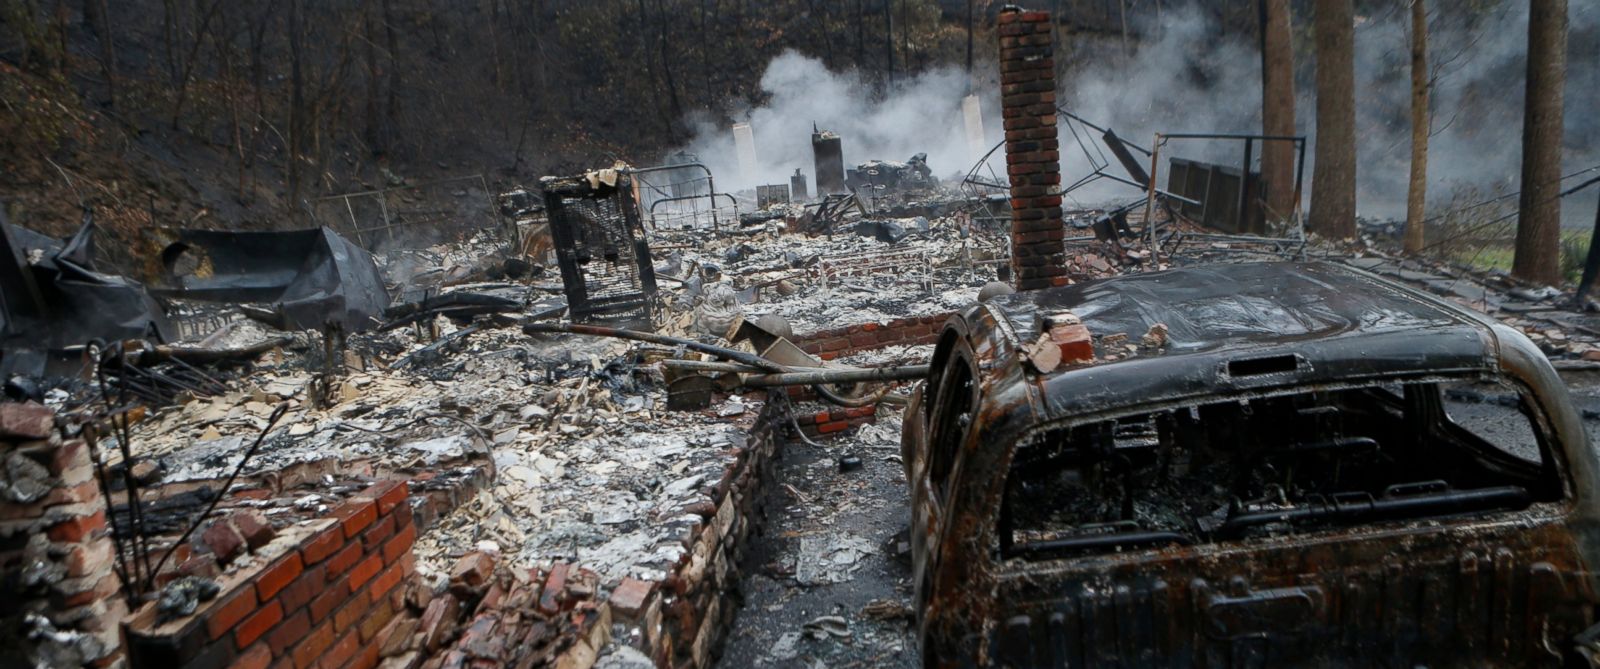 PHOTO: The remains of a home smolder in the wake of a wildfire, Nov. 30, 2016, in Gatlinburg, Tennessee.